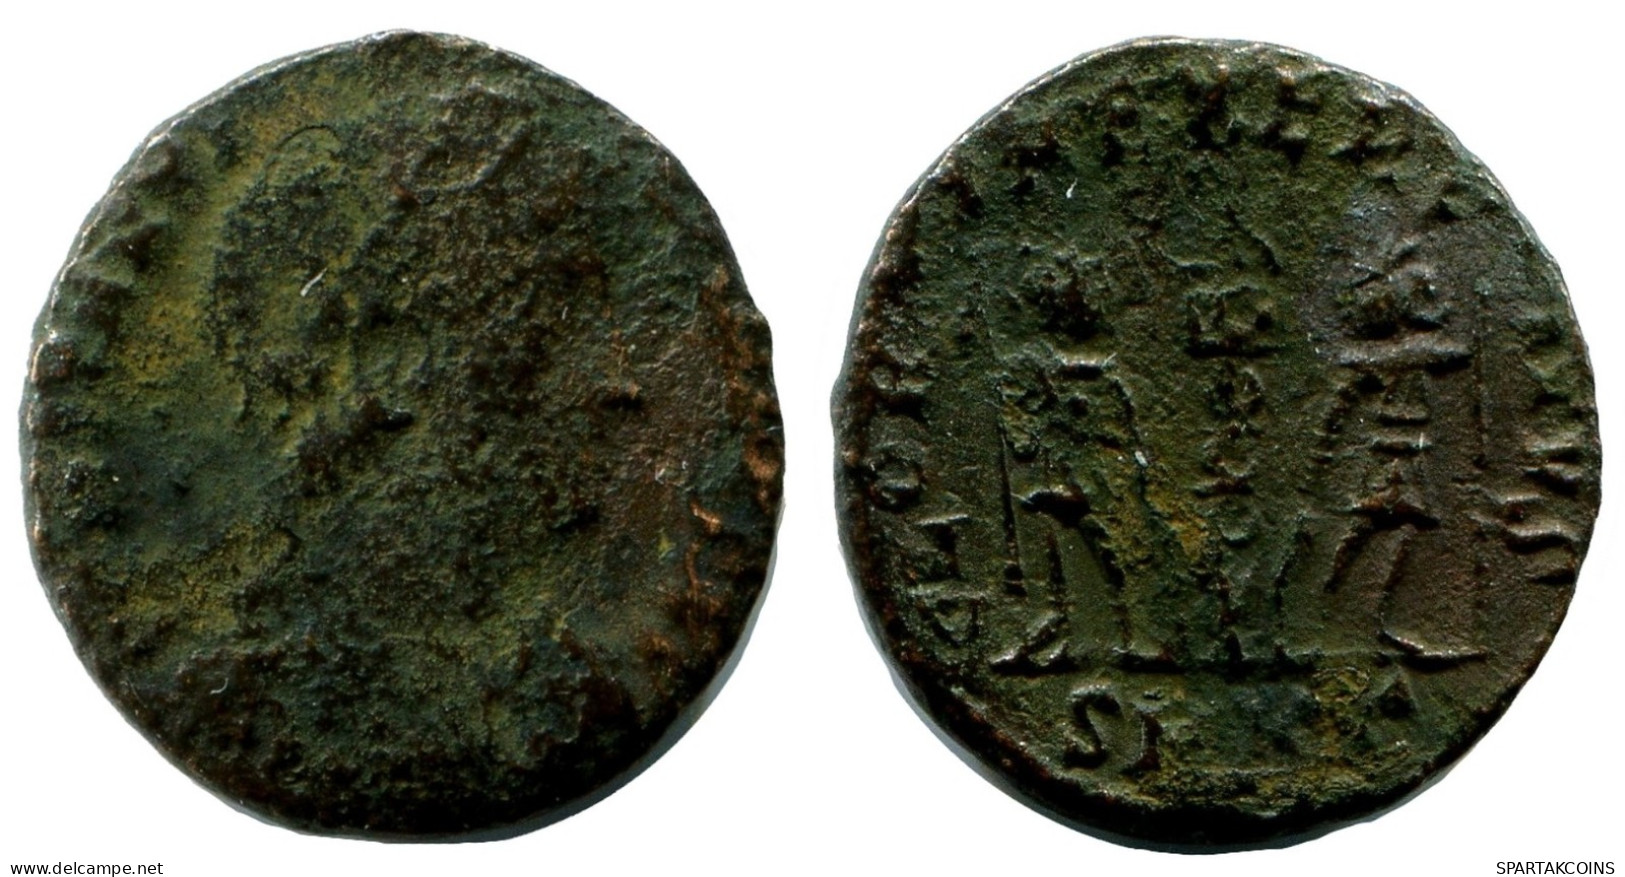 CONSTANTINE I MINTED IN CYZICUS FOUND IN IHNASYAH HOARD EGYPT #ANC11039.14.E.A - El Imperio Christiano (307 / 363)